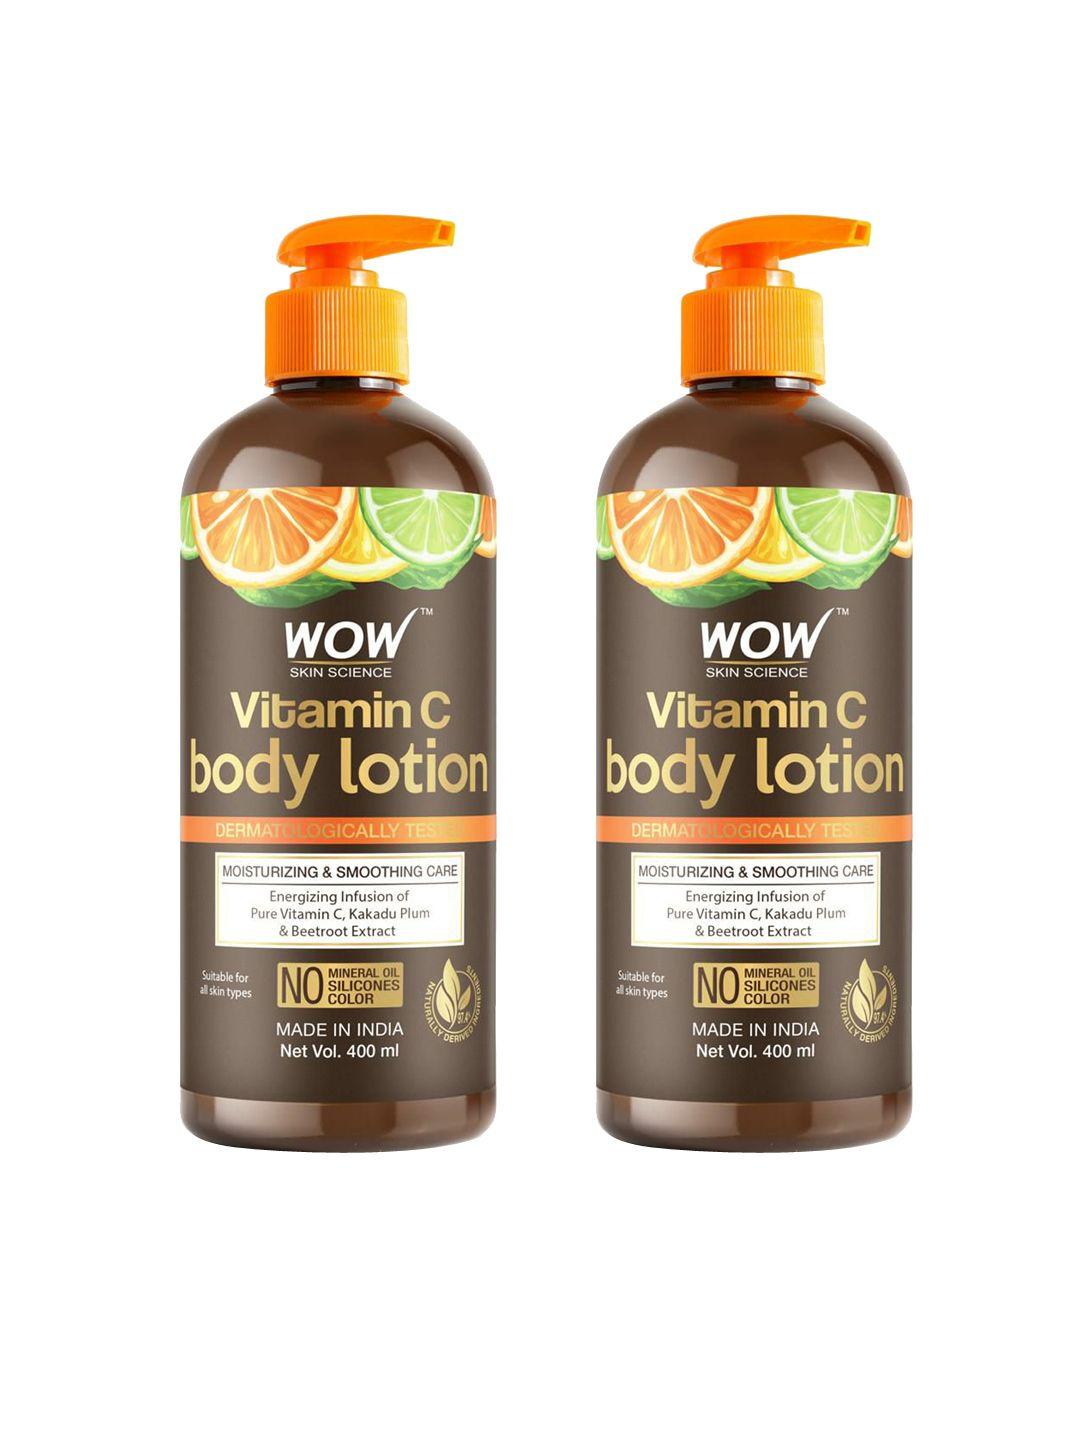 wow skin science set of 2 vitamin c moisturizing & smoothing body lotion - 400 ml each